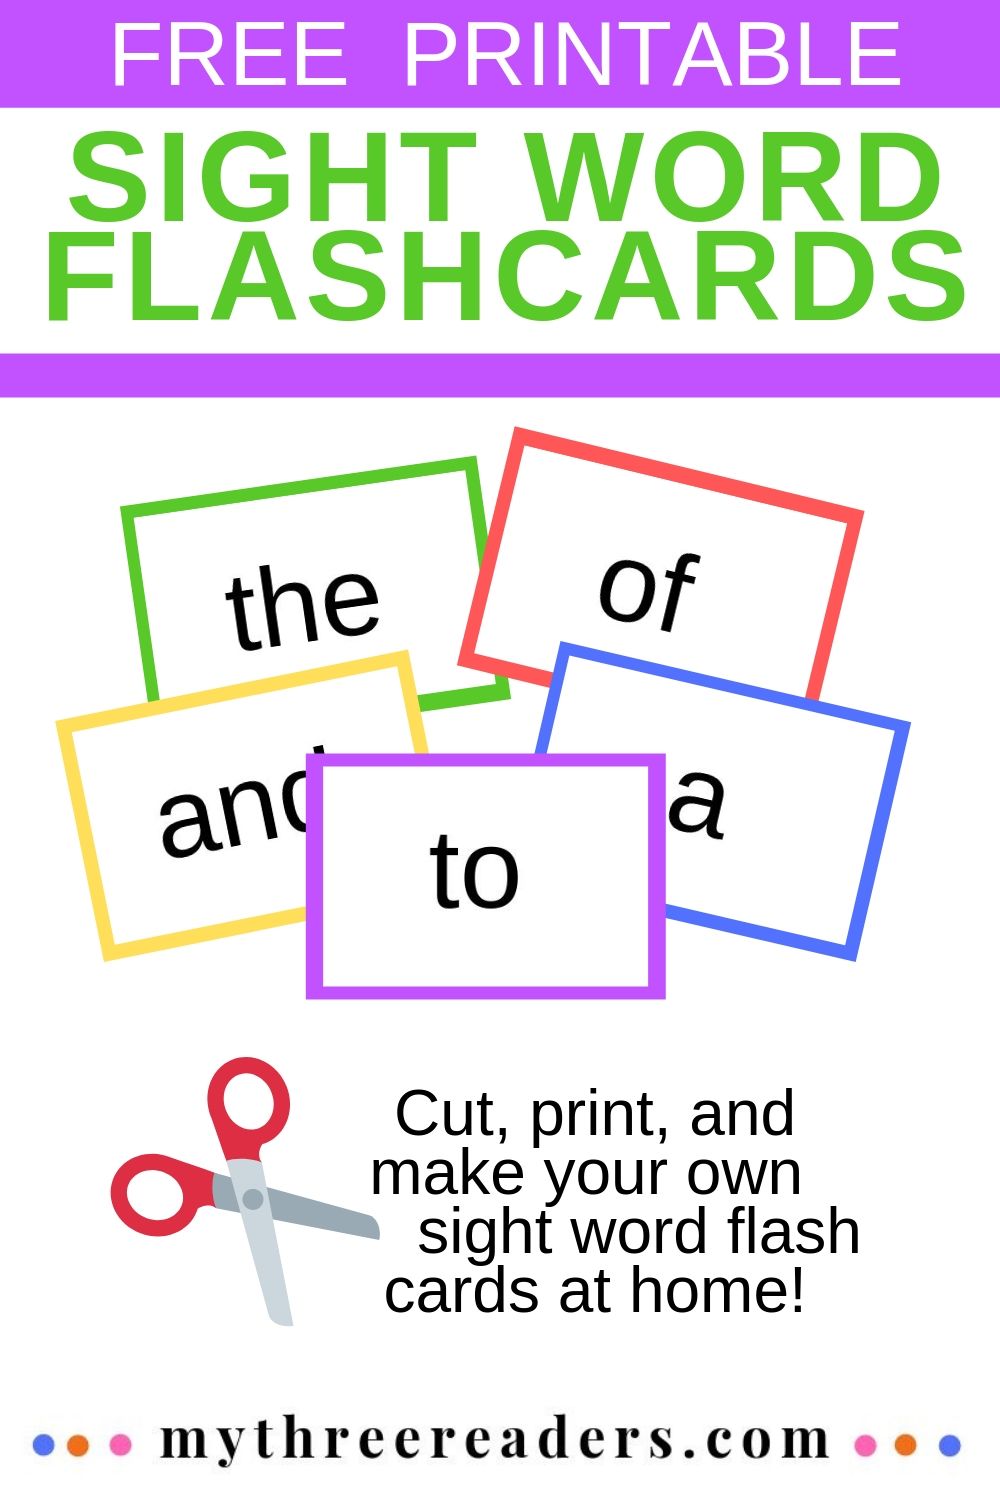 Make Your Own Sight Word Flash Cards Free, Printable for You!